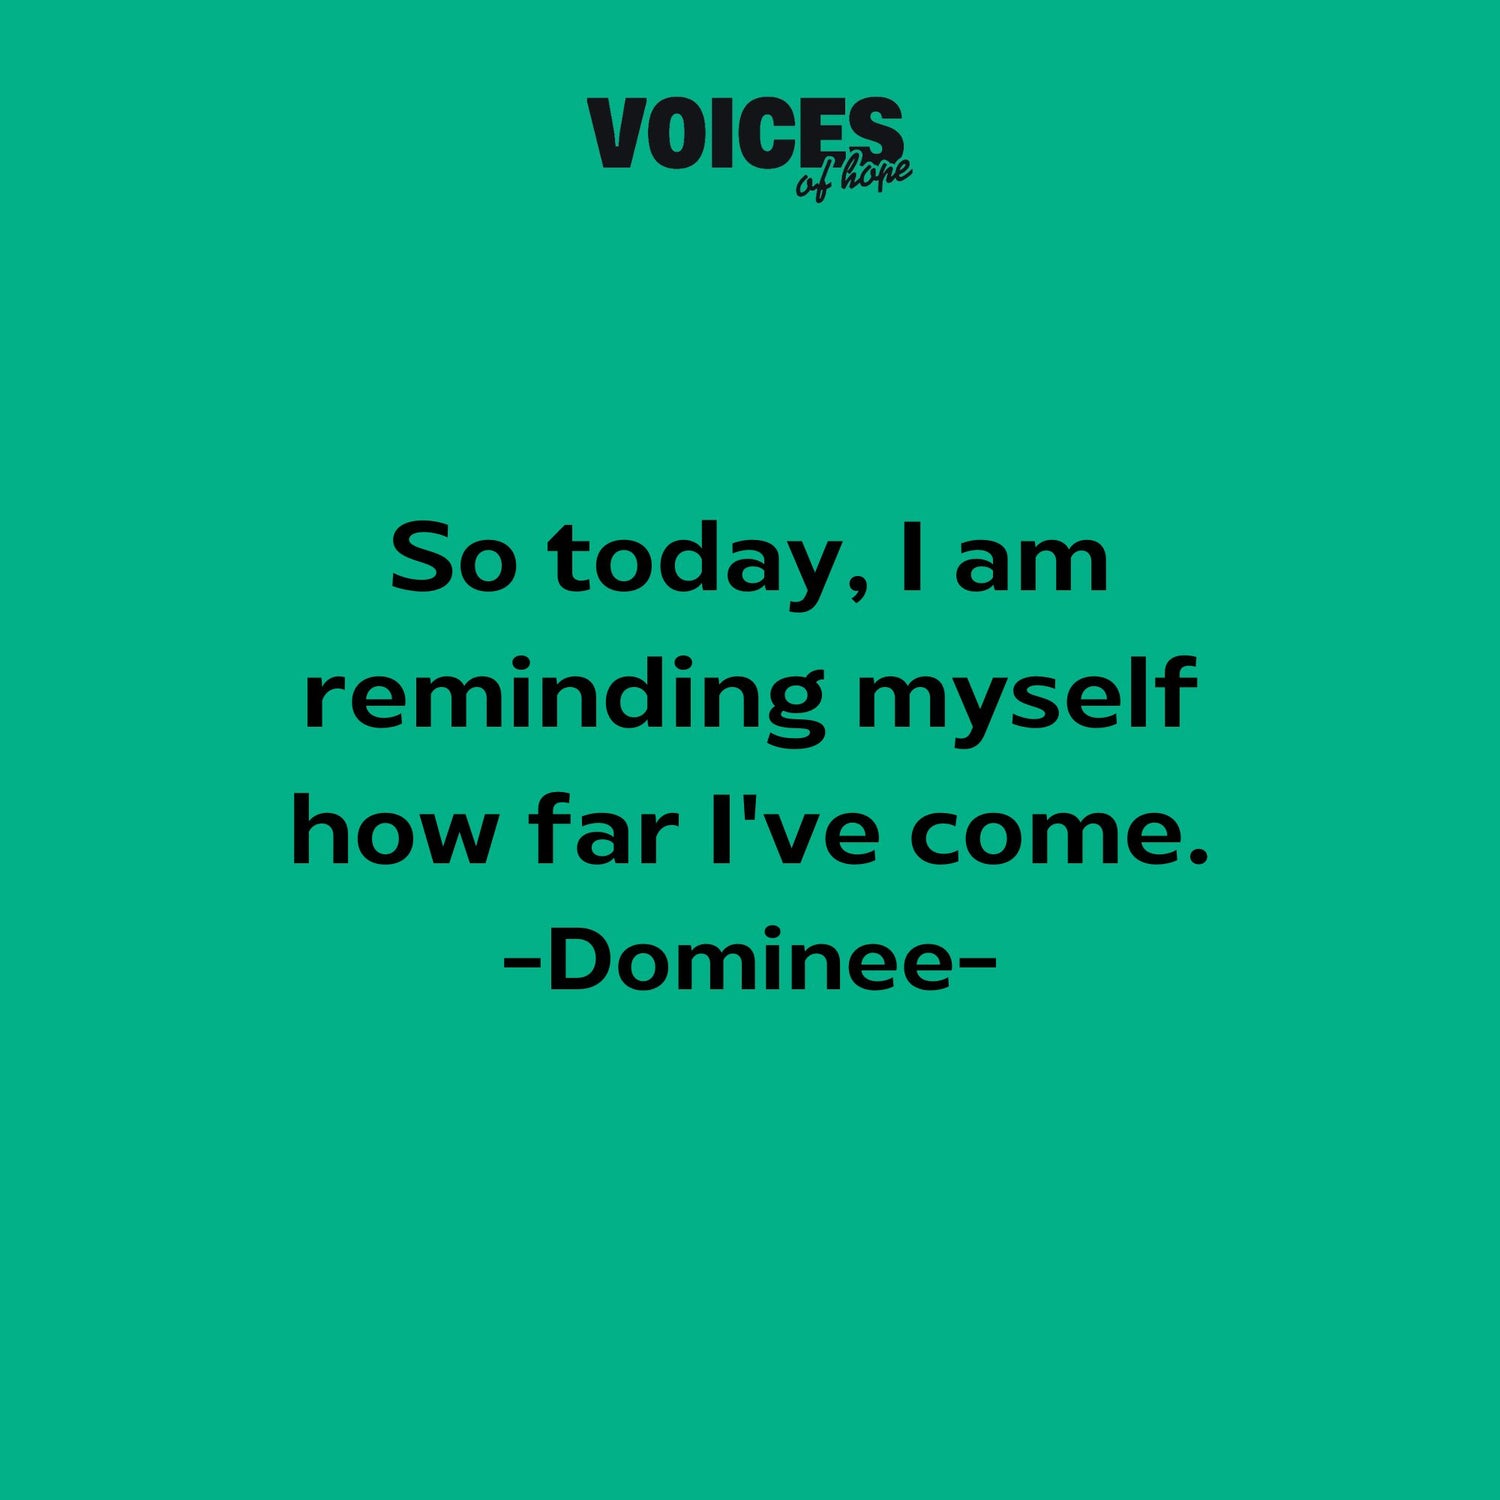 Green background with black writing that reads: "so today, I am reminding myself how far I've come. Dominee."